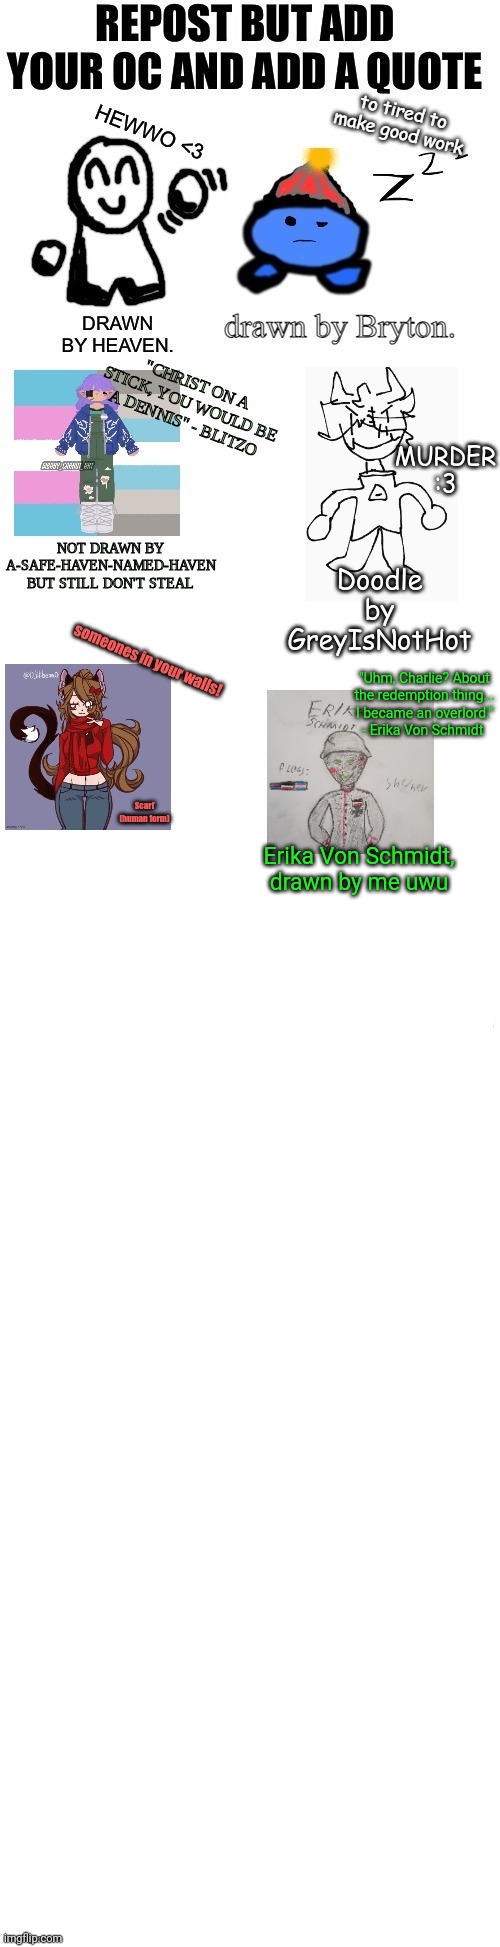 Erika Von Schmidt's lore in comments | "Uhm, Charlie? About the redemption thing... I became an overlord." - Erika Von Schmidt; Erika Von Schmidt,  drawn by me uwu | made w/ Imgflip meme maker